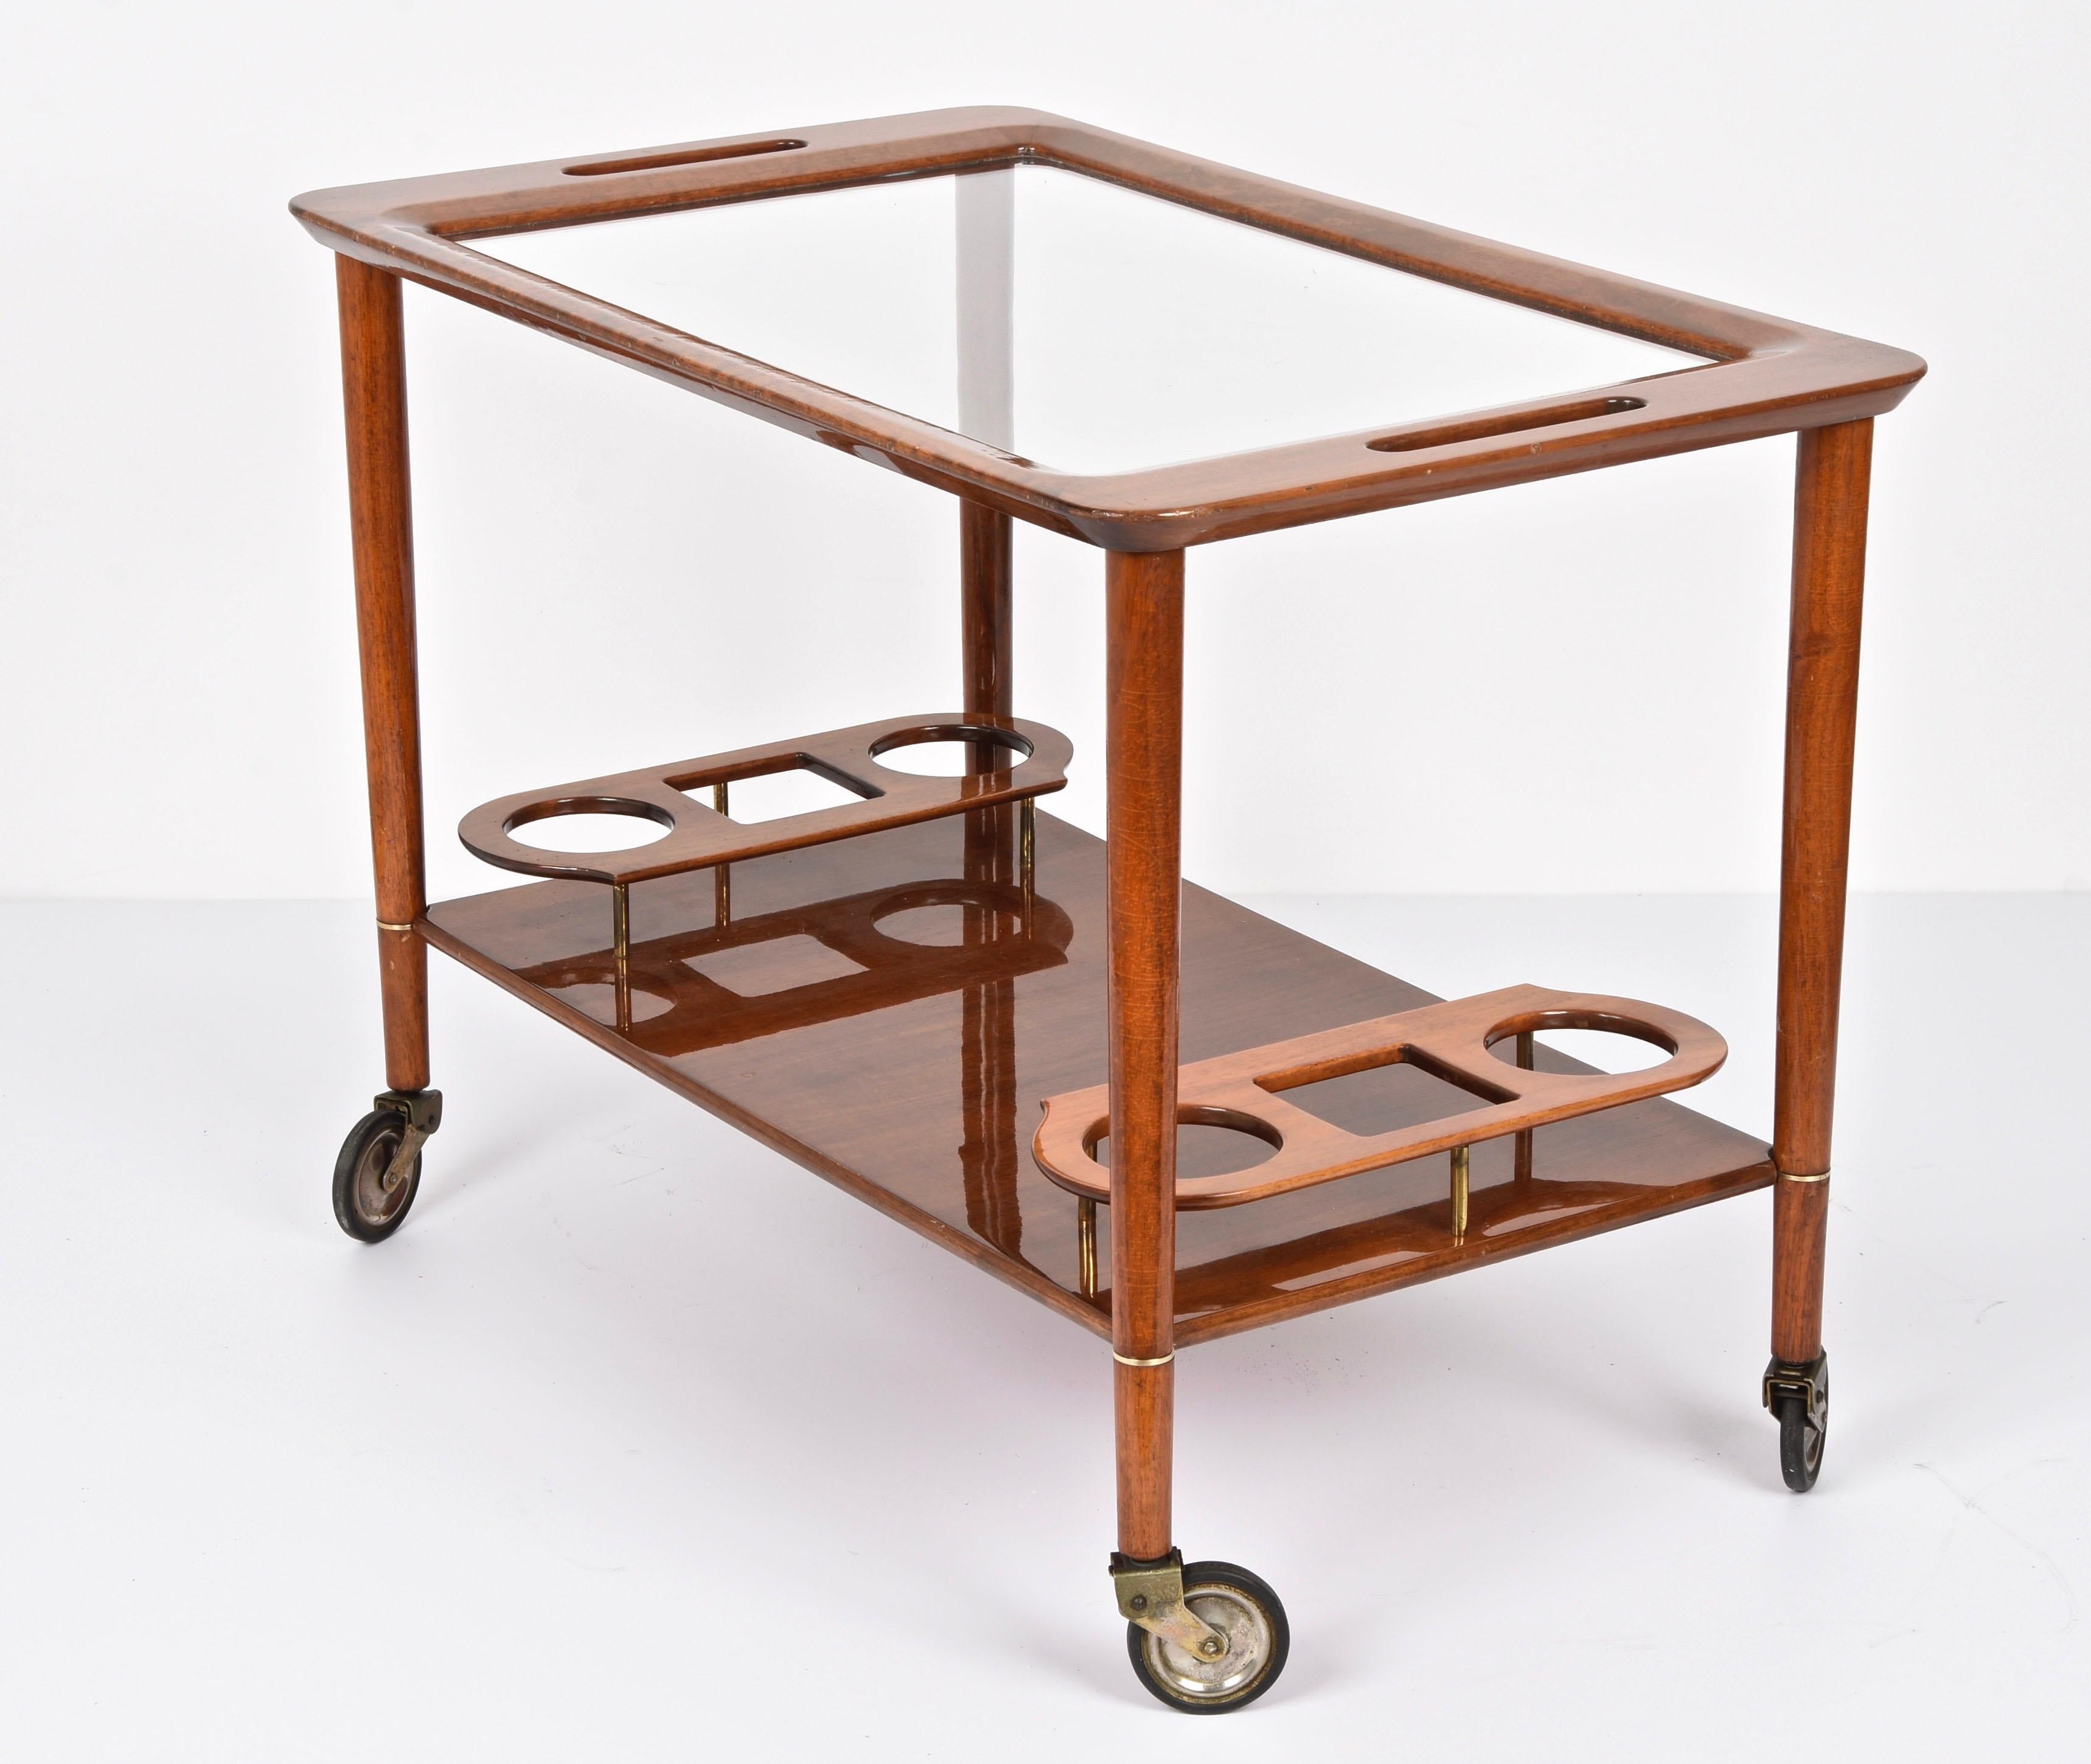 Fantastic mid-century white walnut wood (Junglans Regia) bar trolley with bottle holder. This extraordinary piece is attributed to Cesare Lacca and was designed in Italy in the 1950s.

This wonderful piece is equipped with two ergonomic bottle